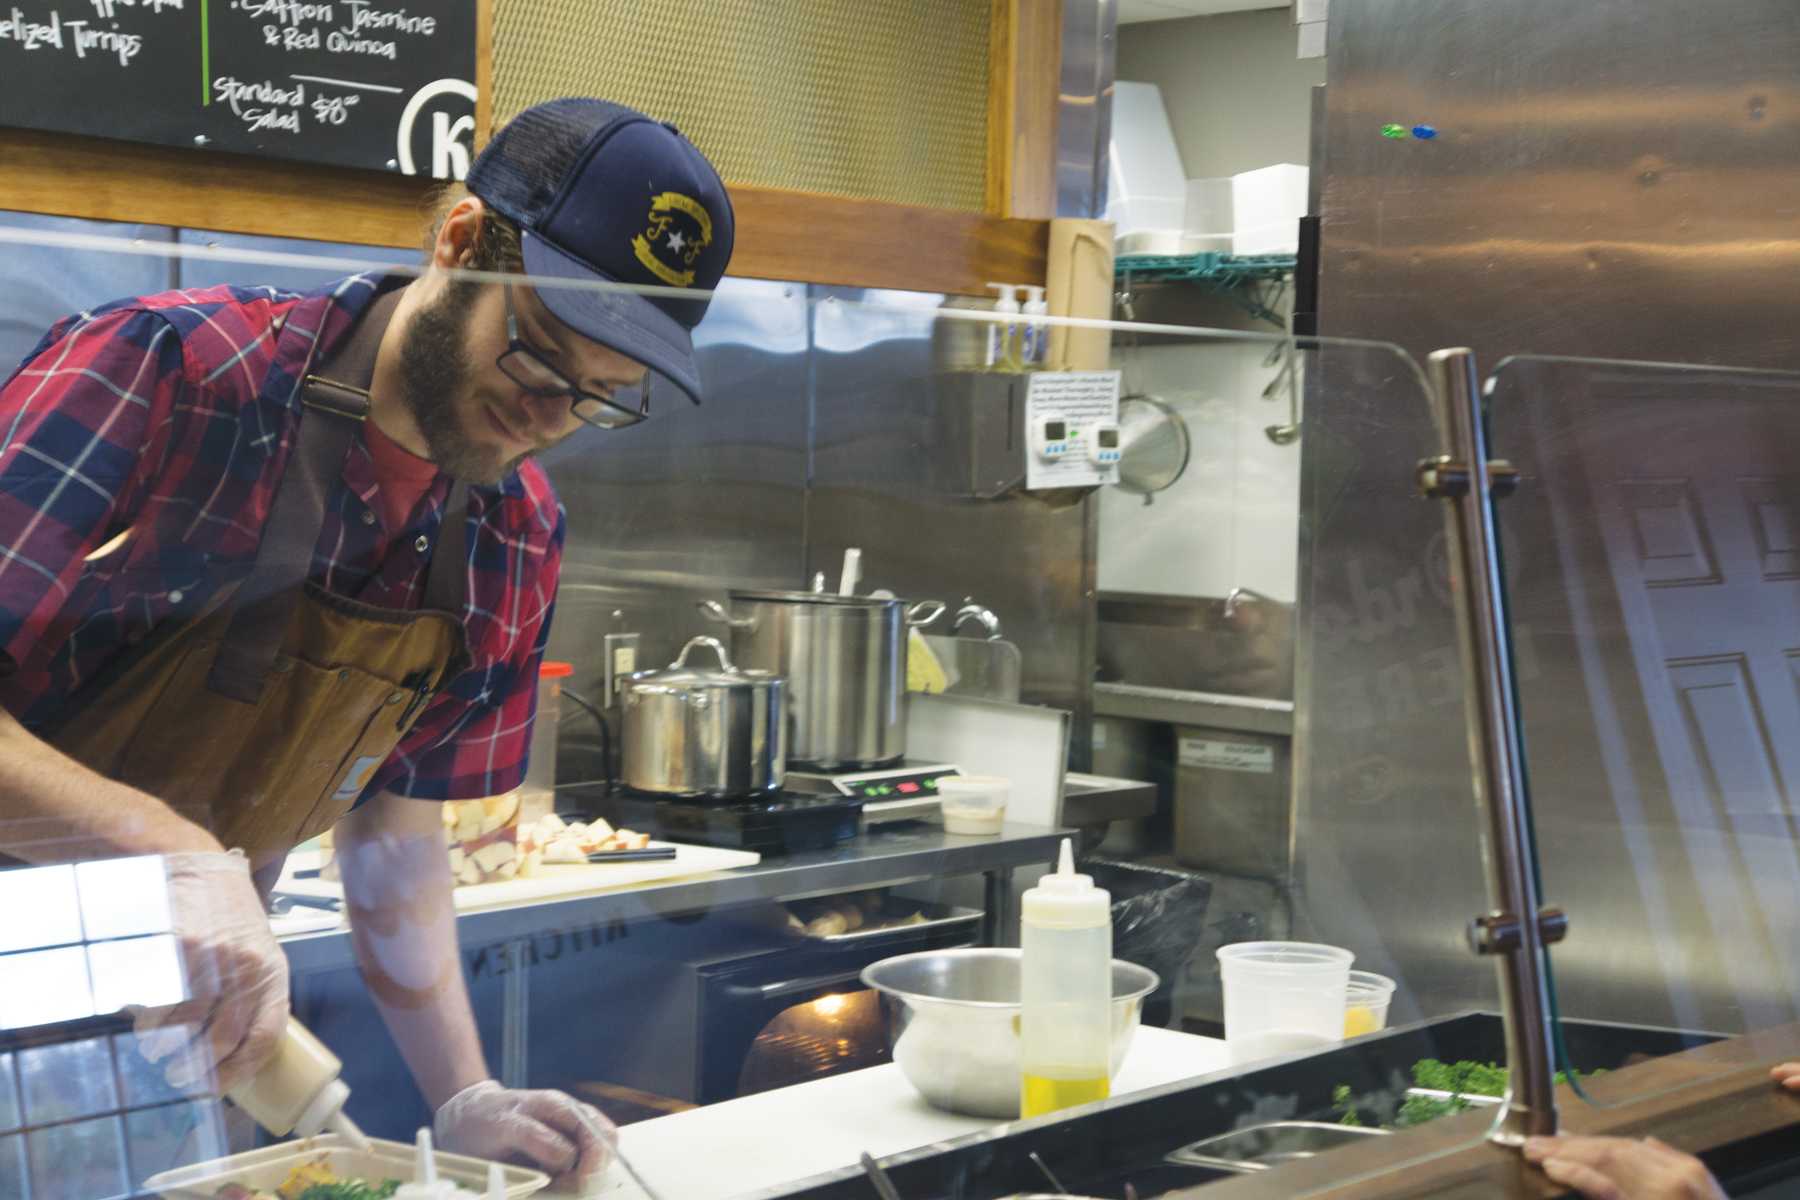 Will Crowell prepares one of Kindly Kitchen's made-to-order bowls. All food served is plant based and locally sourced.